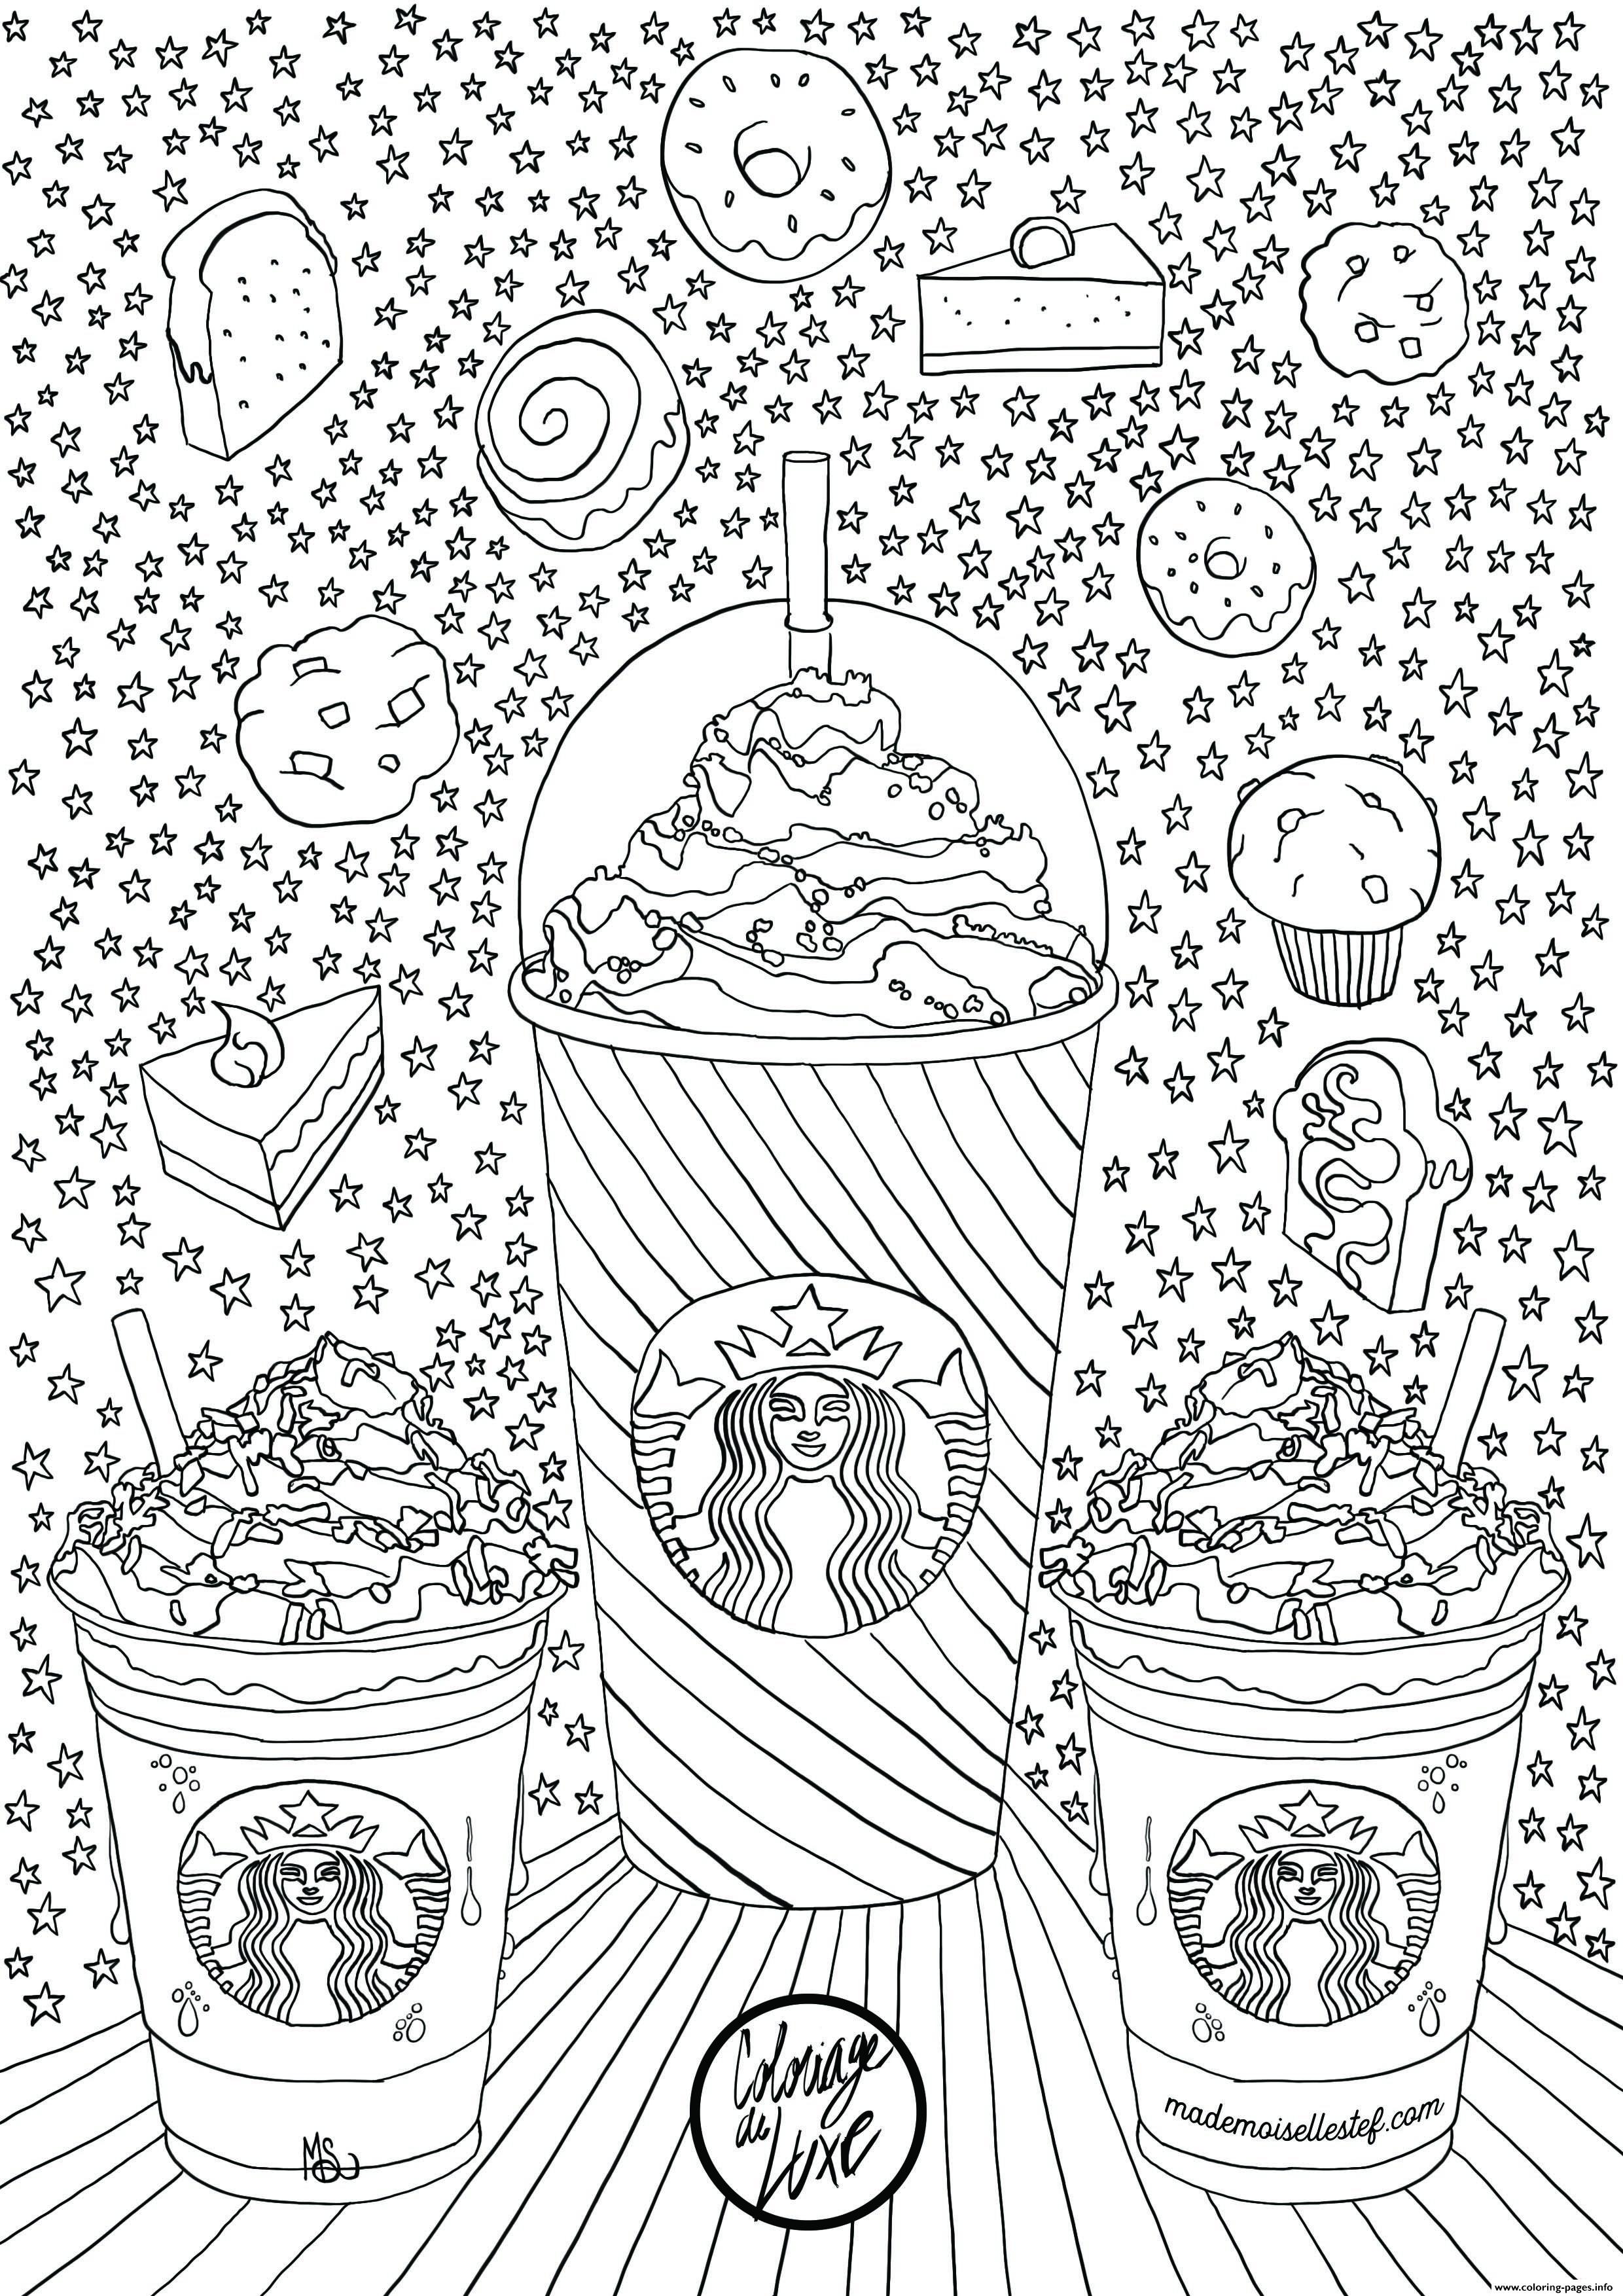 Starbucks Frappuccino Cakes Donuts Adults coloring